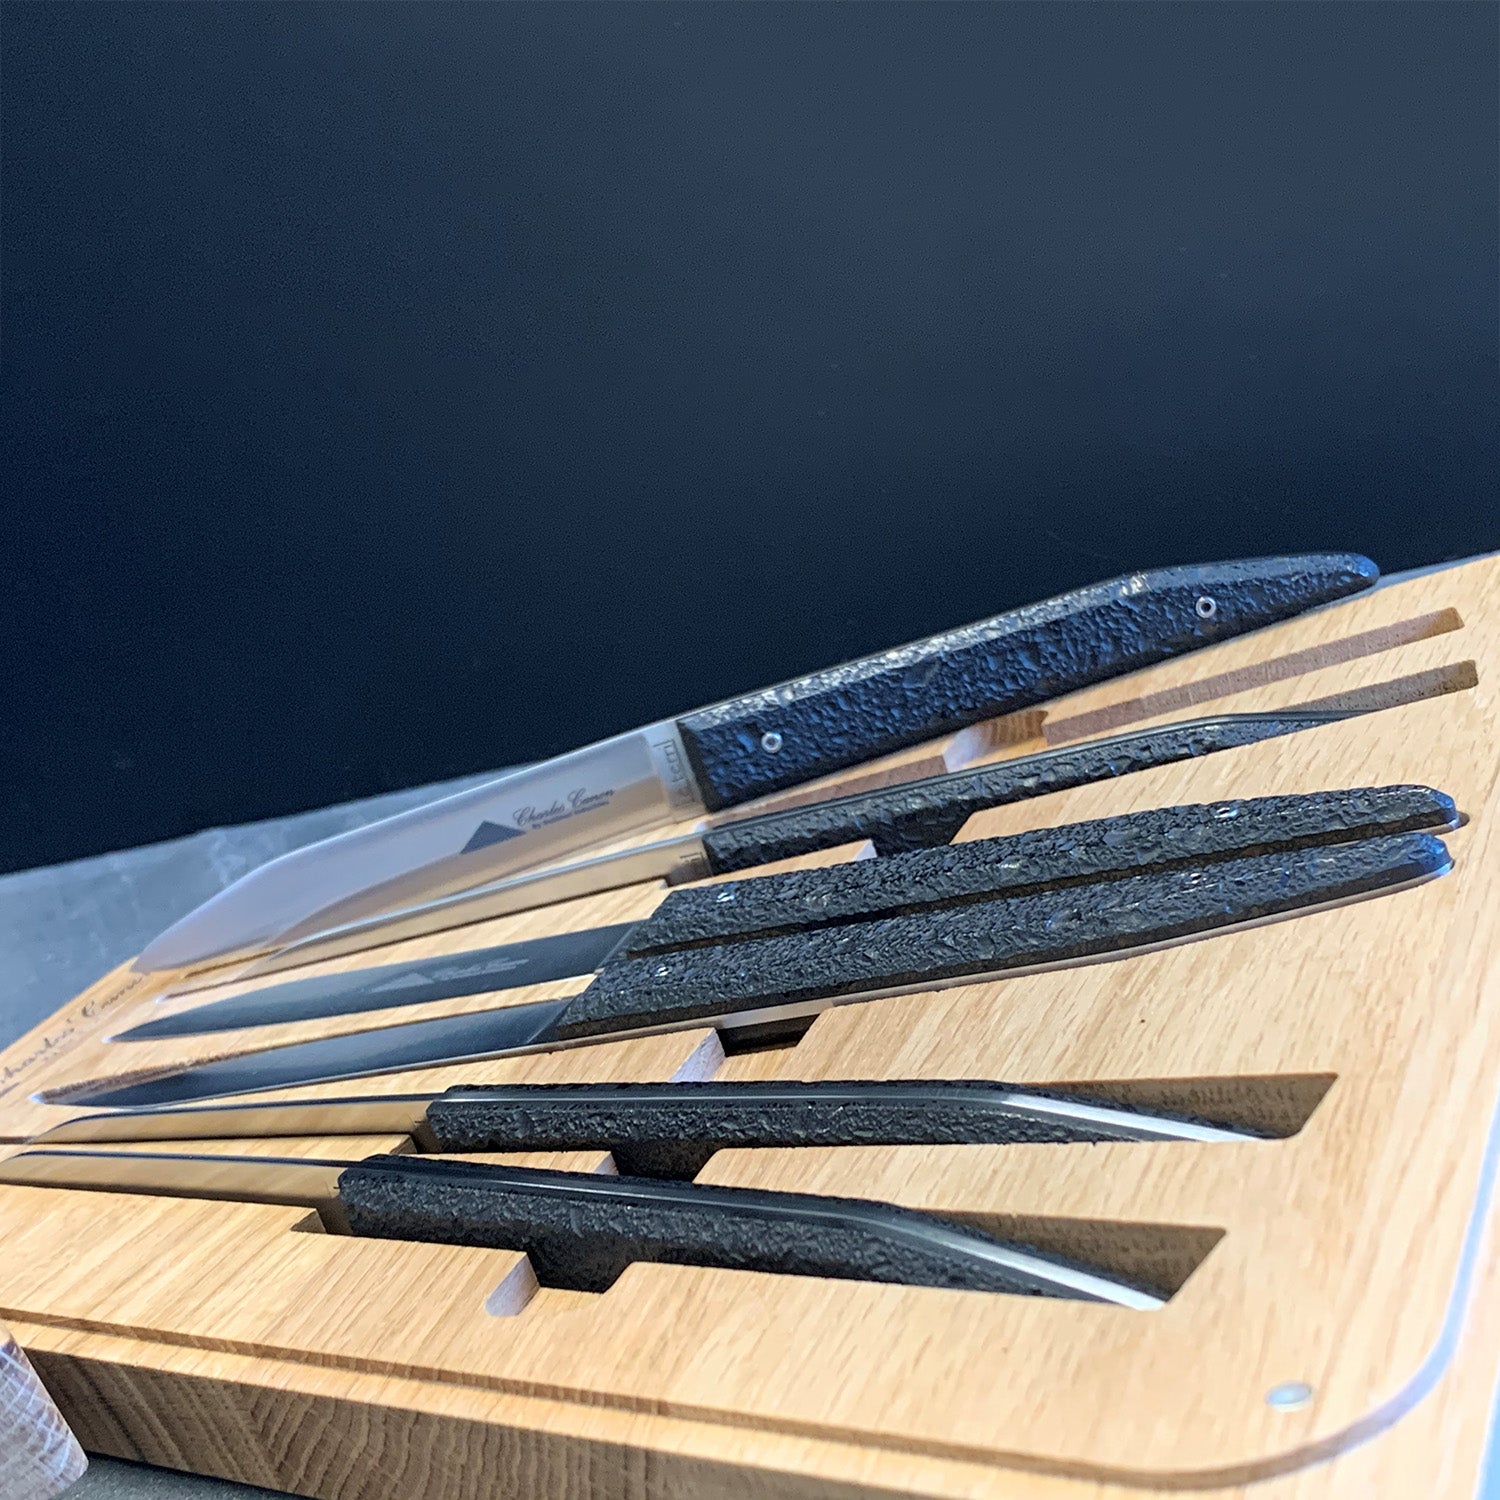 6 raw charcoal table knives